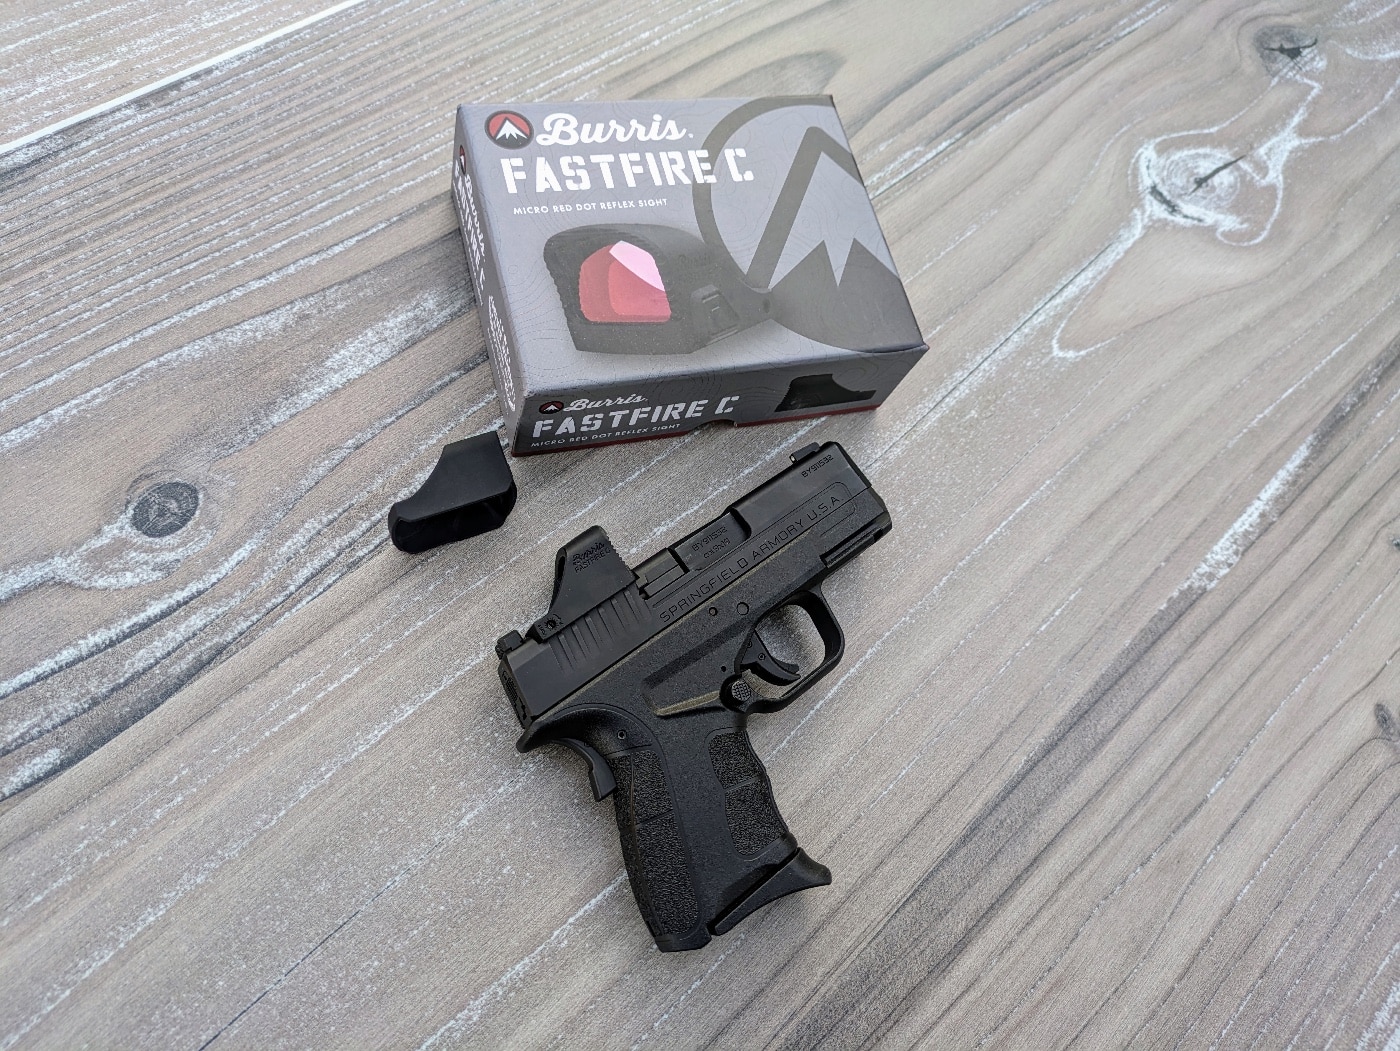 In this image, we see the Burris FastFire mounted to an EDC pistol using the popular Shield RMSc footprint. This allows for a direct mount to the pistol slide.